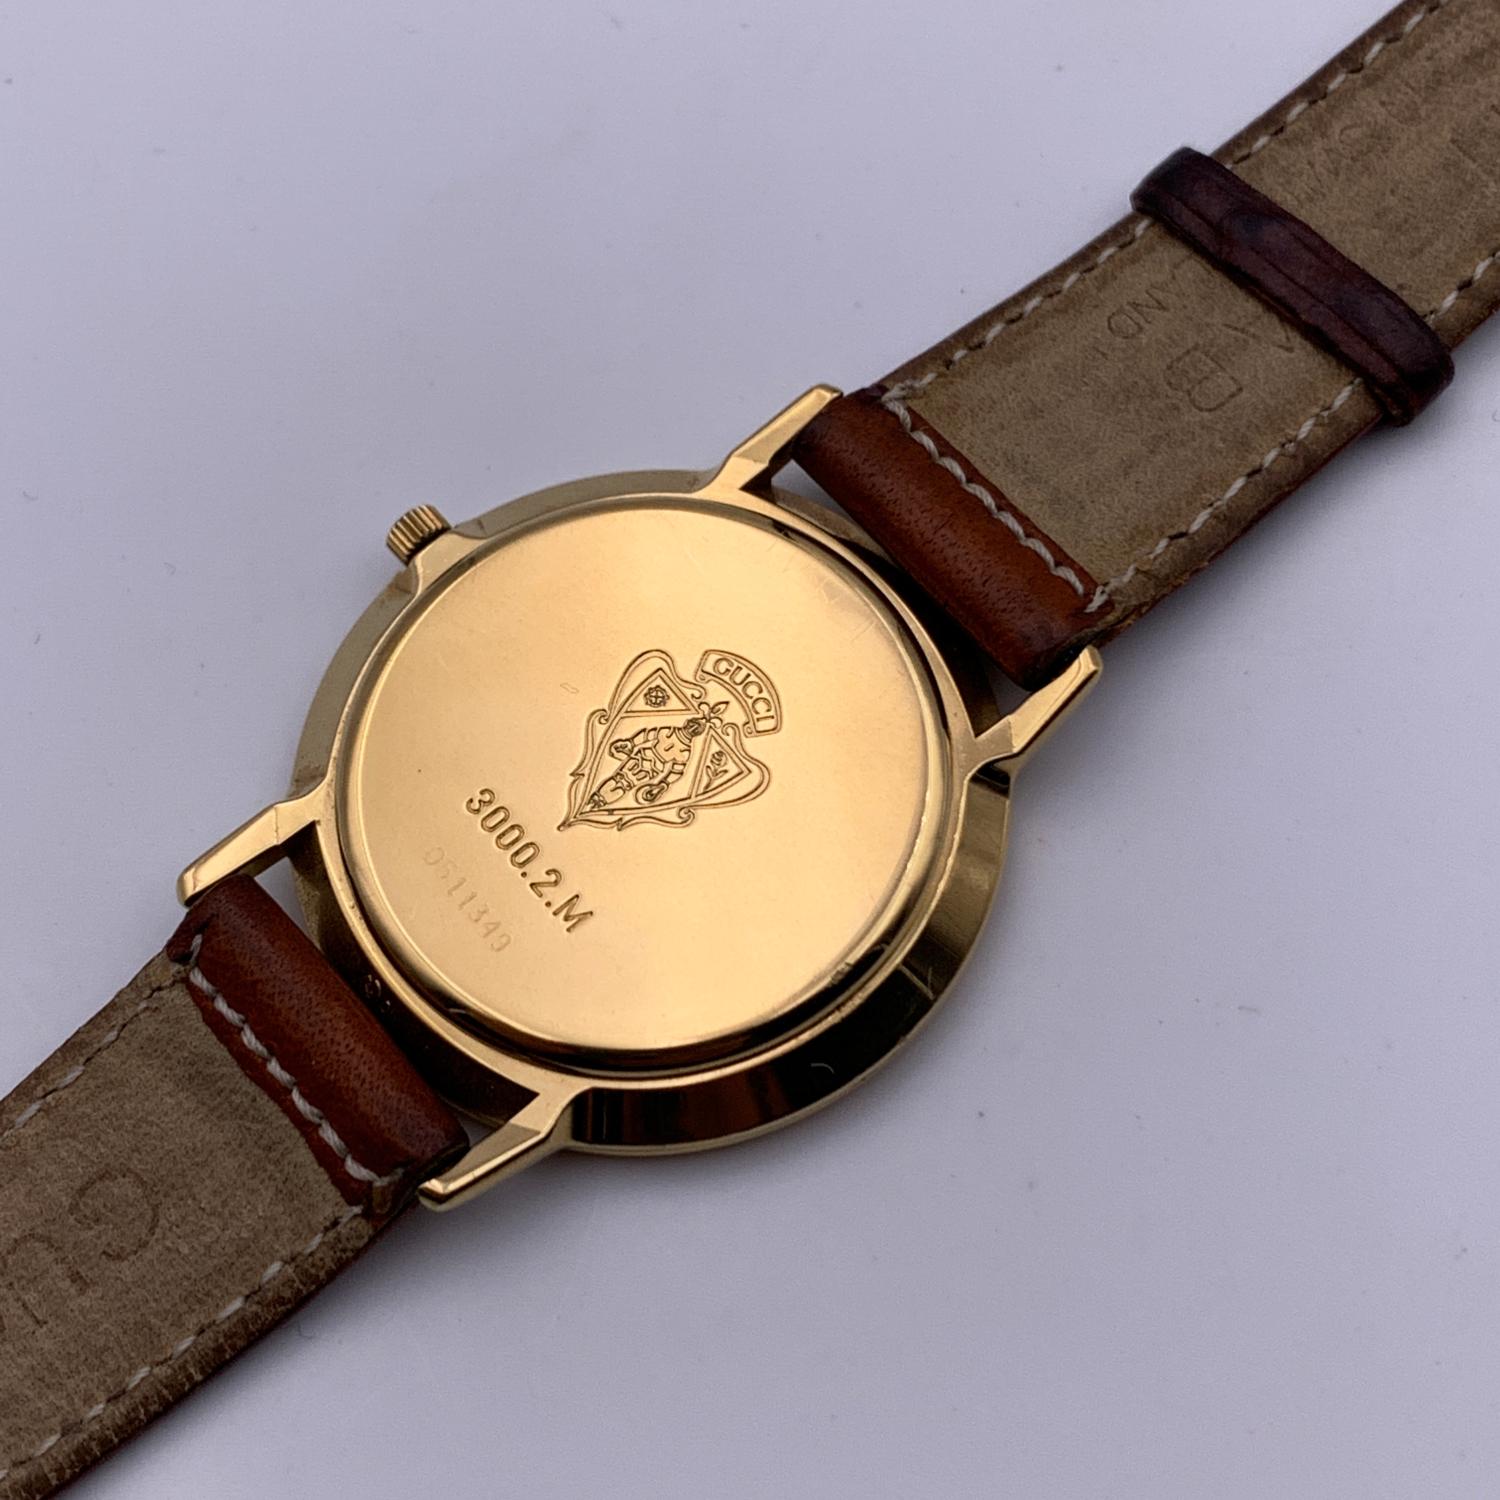 Beautiful vintage wristwatch by GUCCI. Round gold metal stainless steel case. White dial, outer seconds rim and black hands. Swiss Made Quartz Movement. Brown leather wrist strap with 6 holes adjustment. GG - GUCCI buckle. Roman numbers engraved on